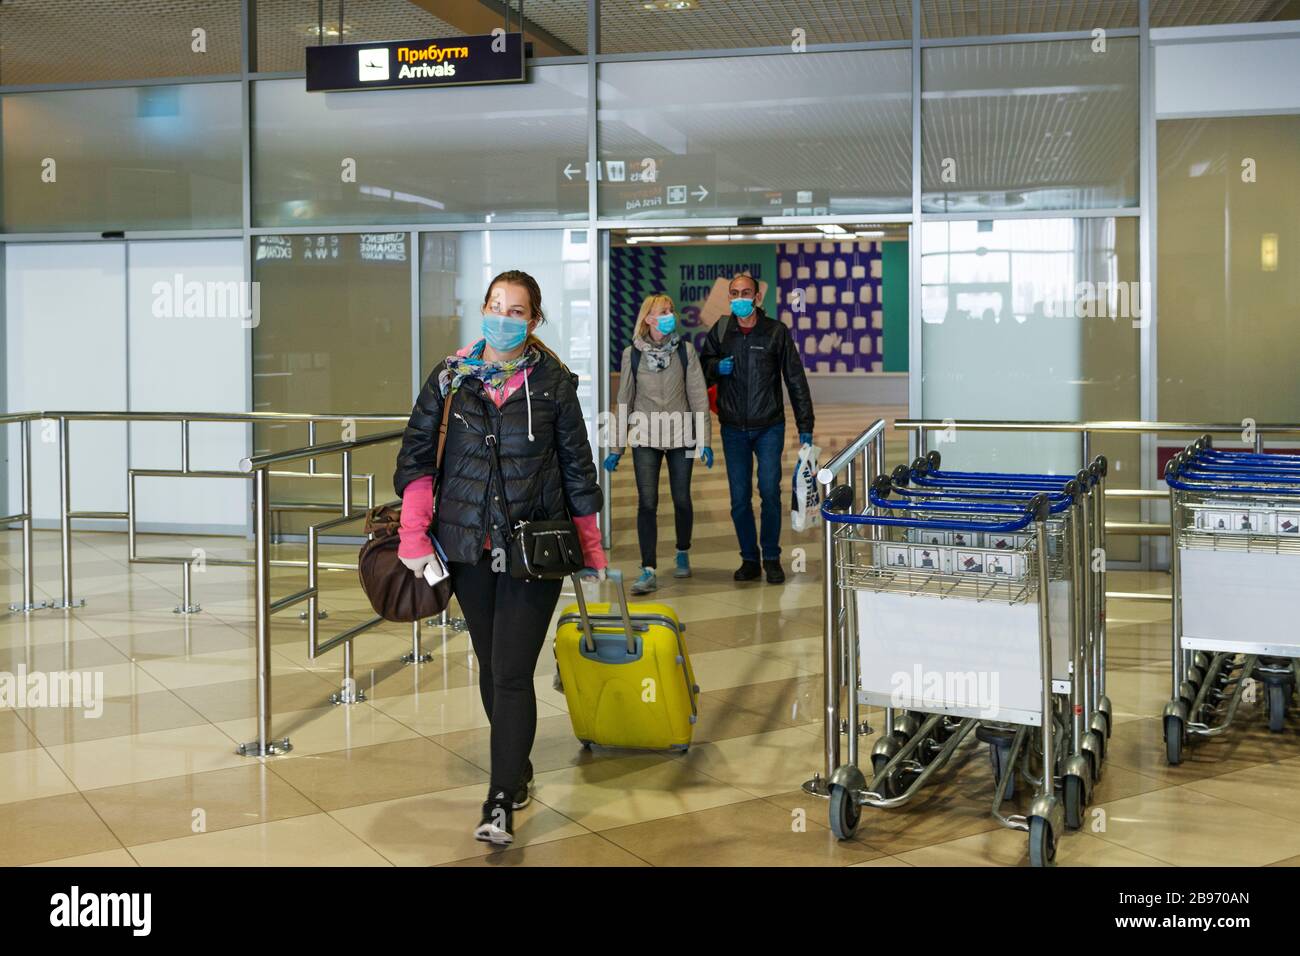 Boryspil airport, Ukraine, March 22 2020, arrivals gate, passengers of special flights organized to return people back home during coronavirus outbrea Stock Photo